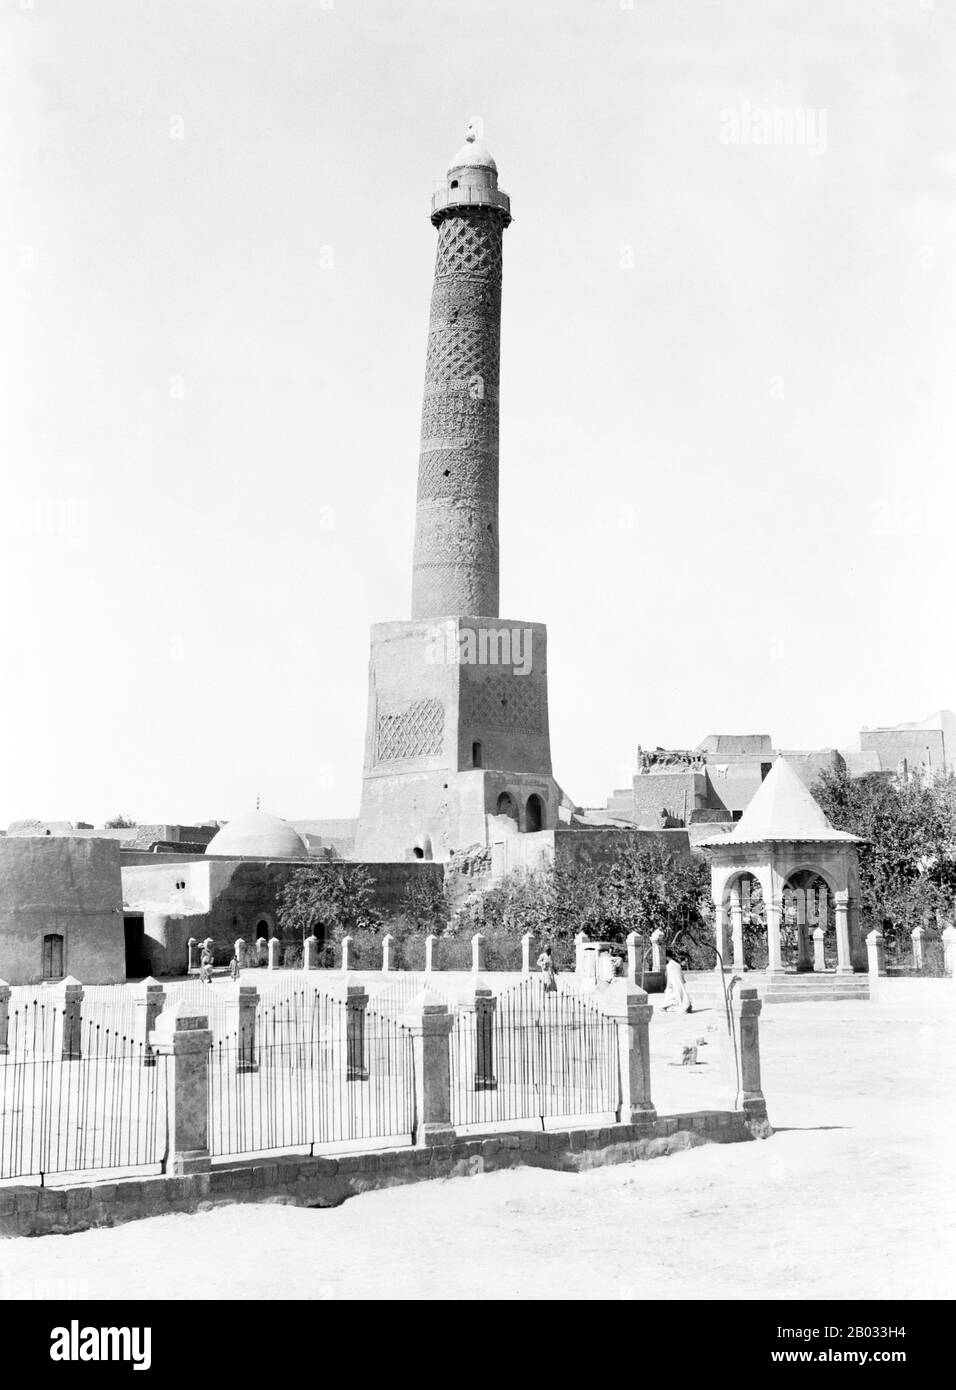 The Great Mosque of al-Nuri is a historical mosque in Mosul, Iraq famous for its leaning minaret. Tradition holds that Nur ad-Din Zangi built the mosque in 1172-73, shortly before his death. According to the chronicle of Ibn al-Athir, after Nur ad-Din took control of Mosul he ordered his nephew Fakhr al-Din to build the mosque.  The structure was targeted by ISIS militants who occupied Mosul on June 10, 2014 and previously destroyed the Tomb of Jonah. However residents of Mosul incensed with the destruction of their cultural sites protected the mosque by forming a human chain and forming a res Stock Photo